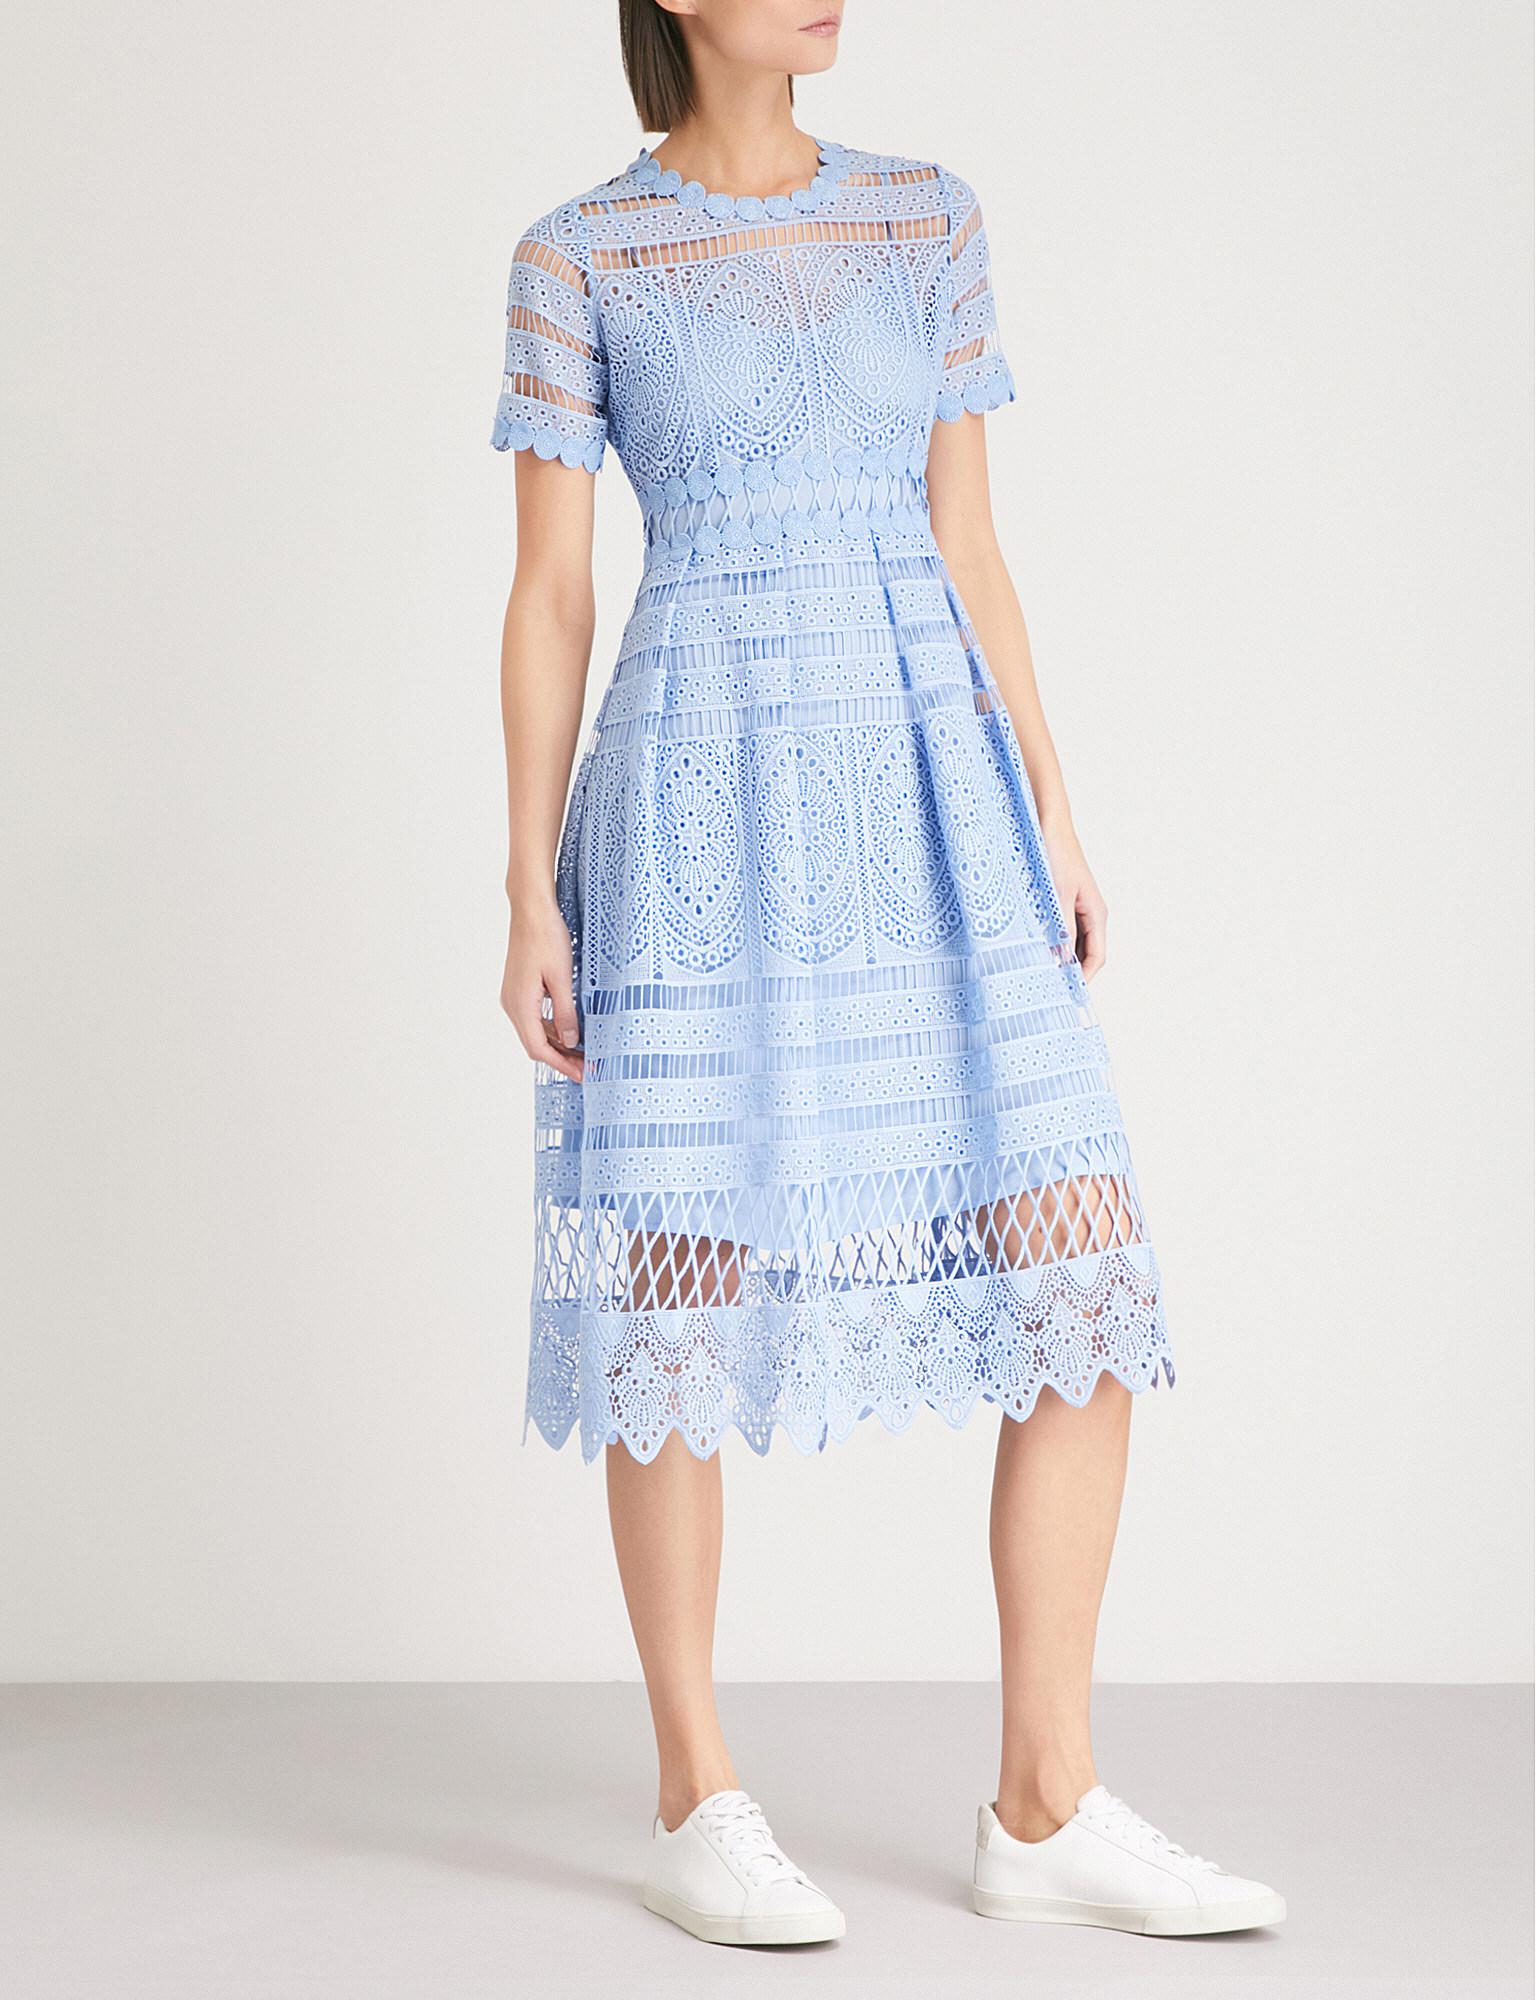 Maje Embroidered Lace Dress in Blue | Lyst